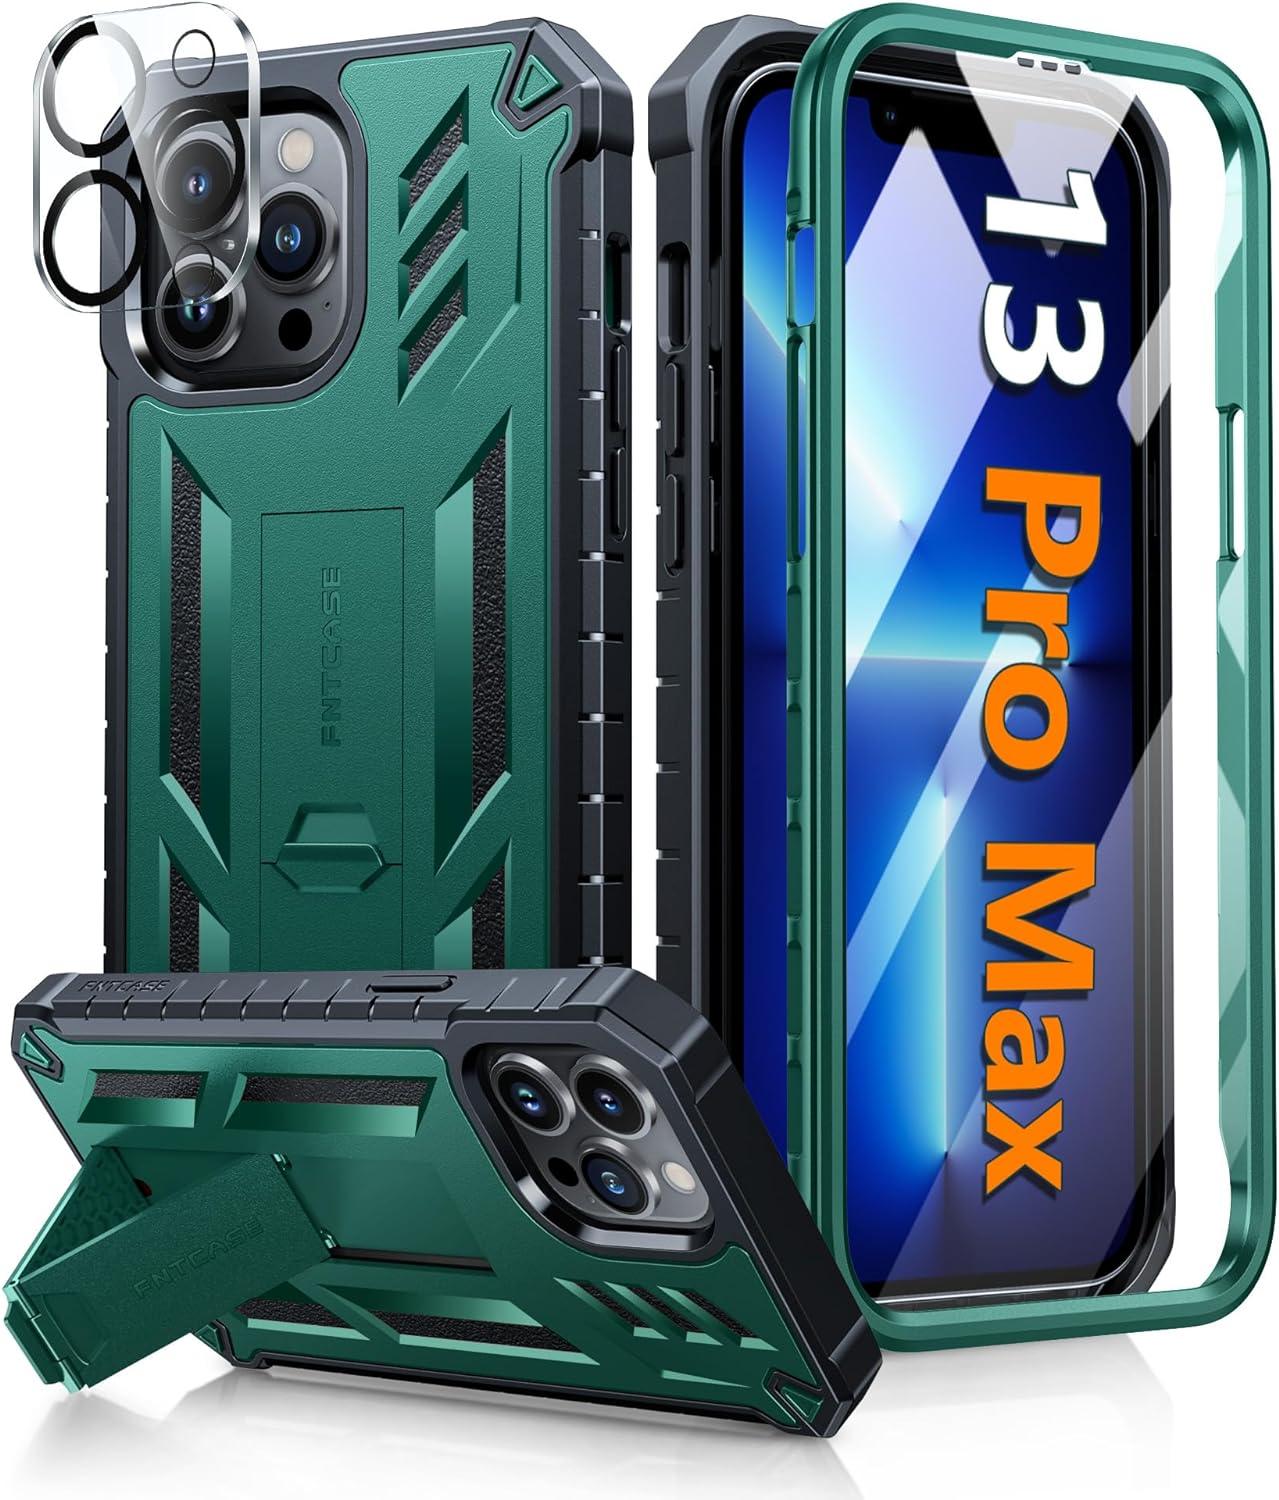 iPhone 13 Pro Max 6.7 inch 2021 Military Bumper Rugged Case with Kickstand - FNTCASE OFFICIAL